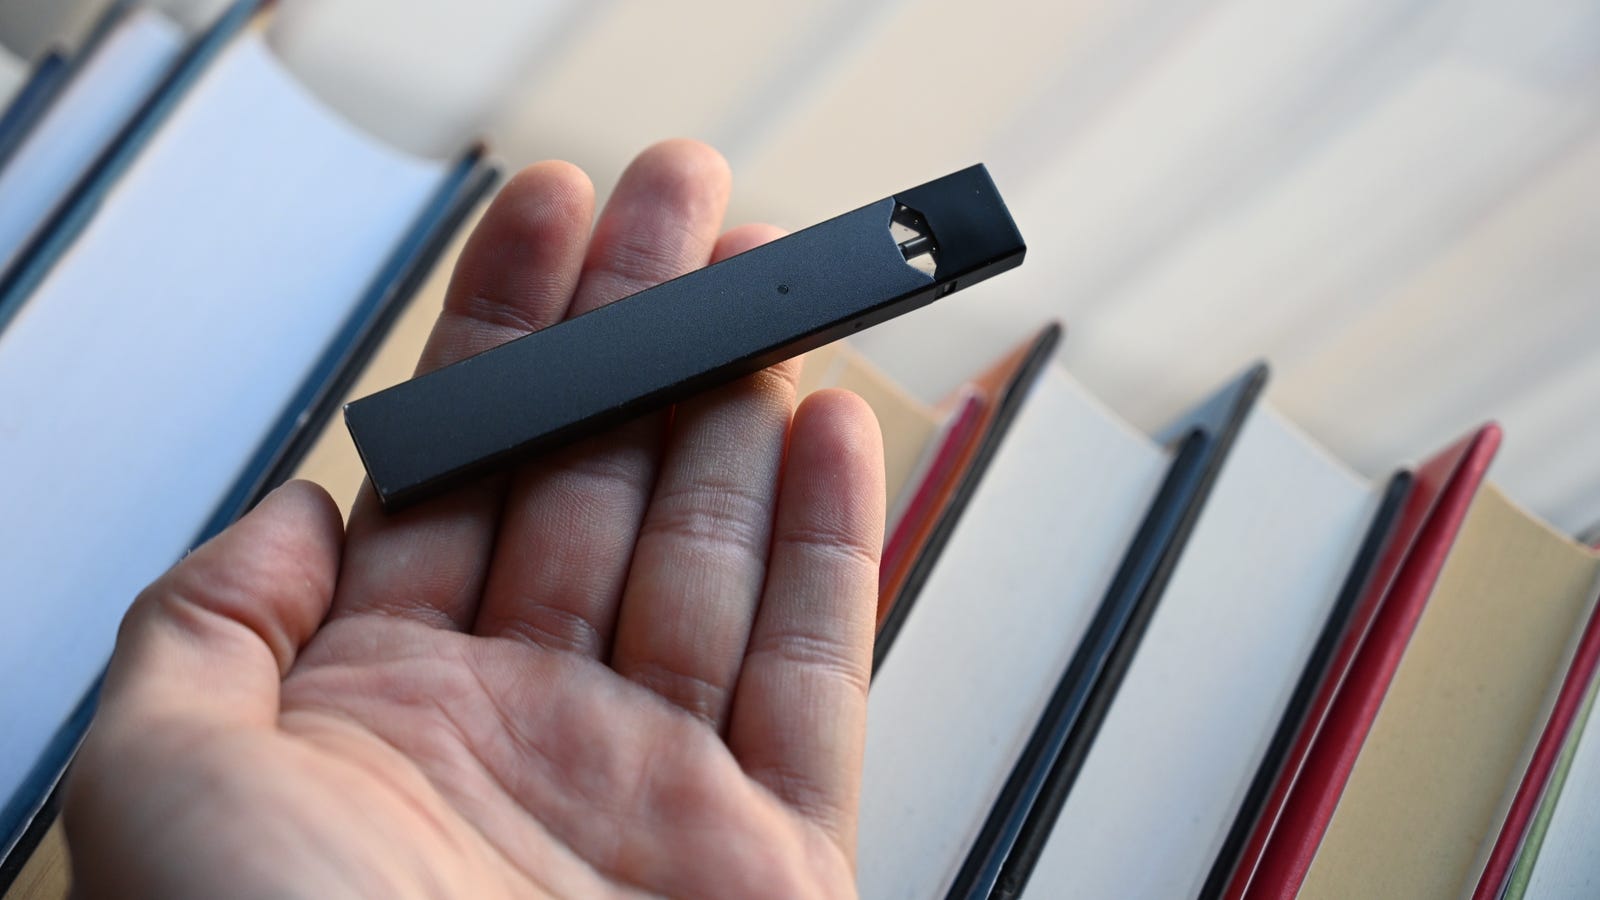 photo of Nearly Half of Juul's Followers on Twitter Last Year Were Teens, Report Claims image